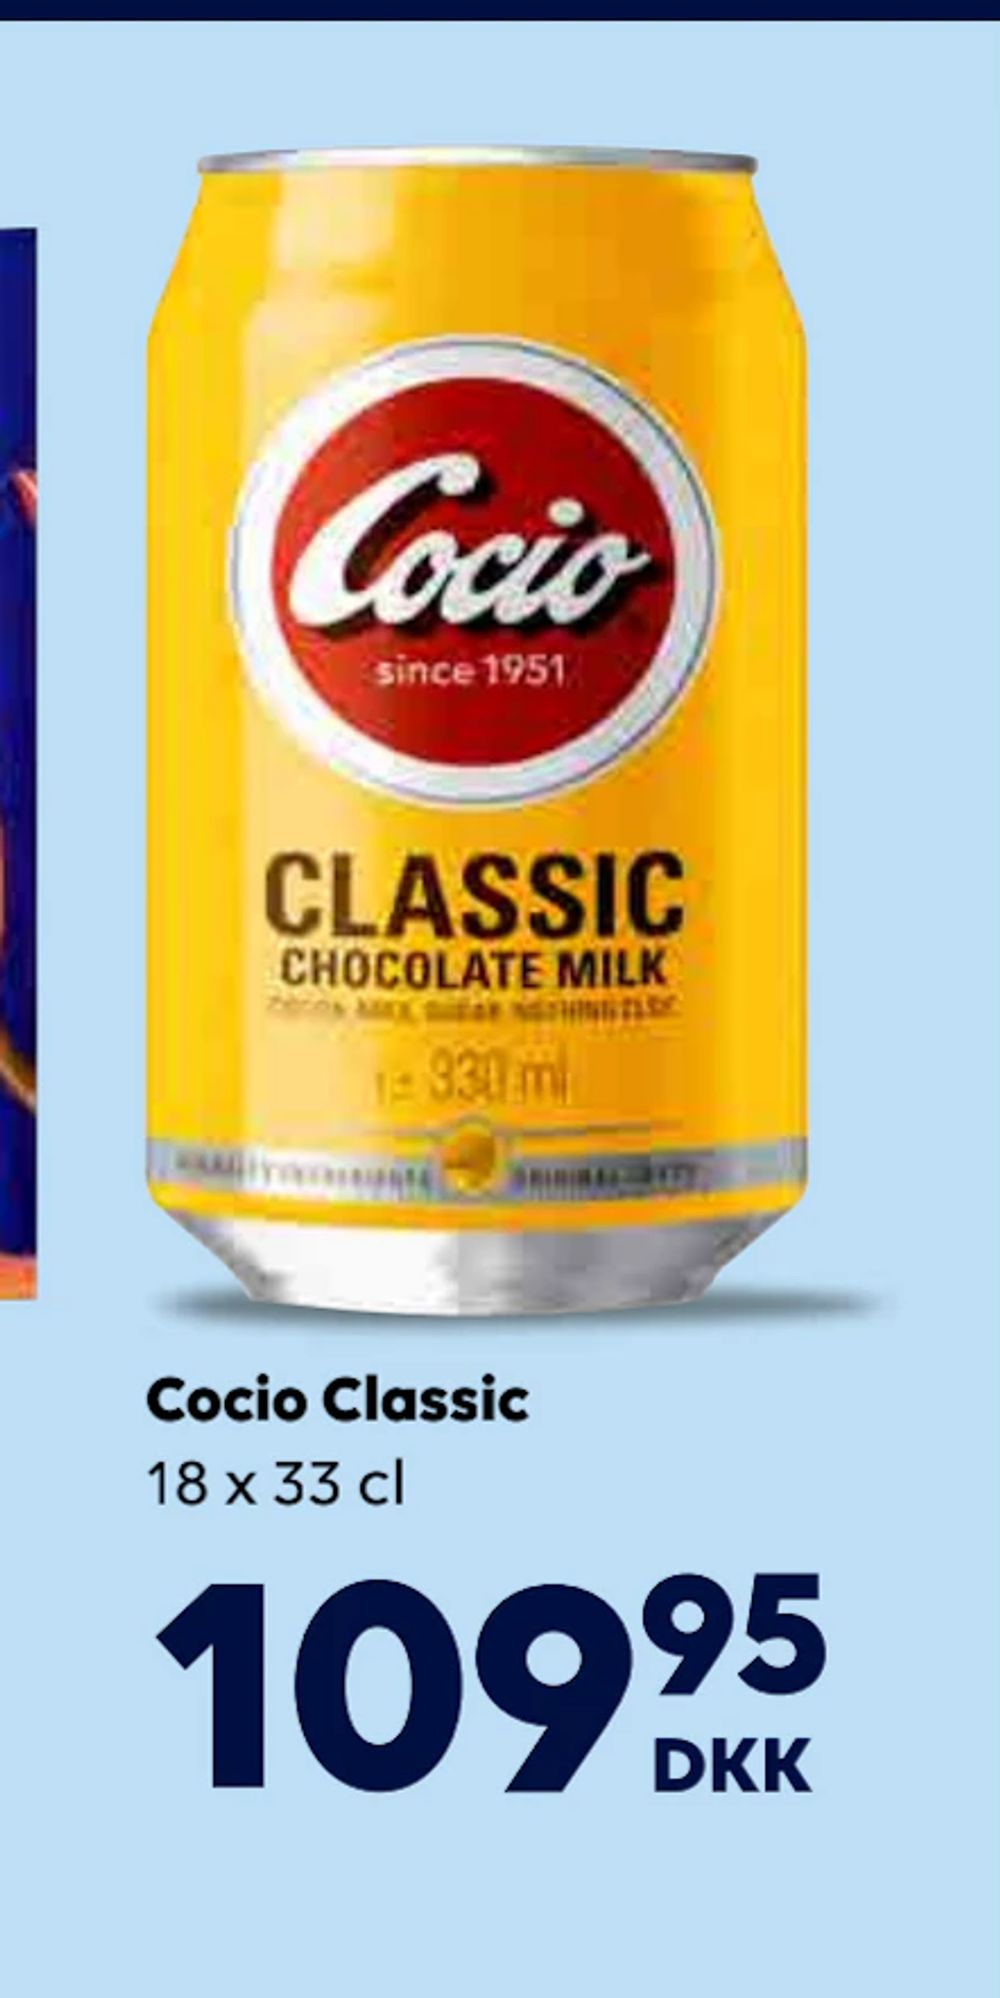 Deals on Cocio Classic from BorderShop at 109,95 kr.